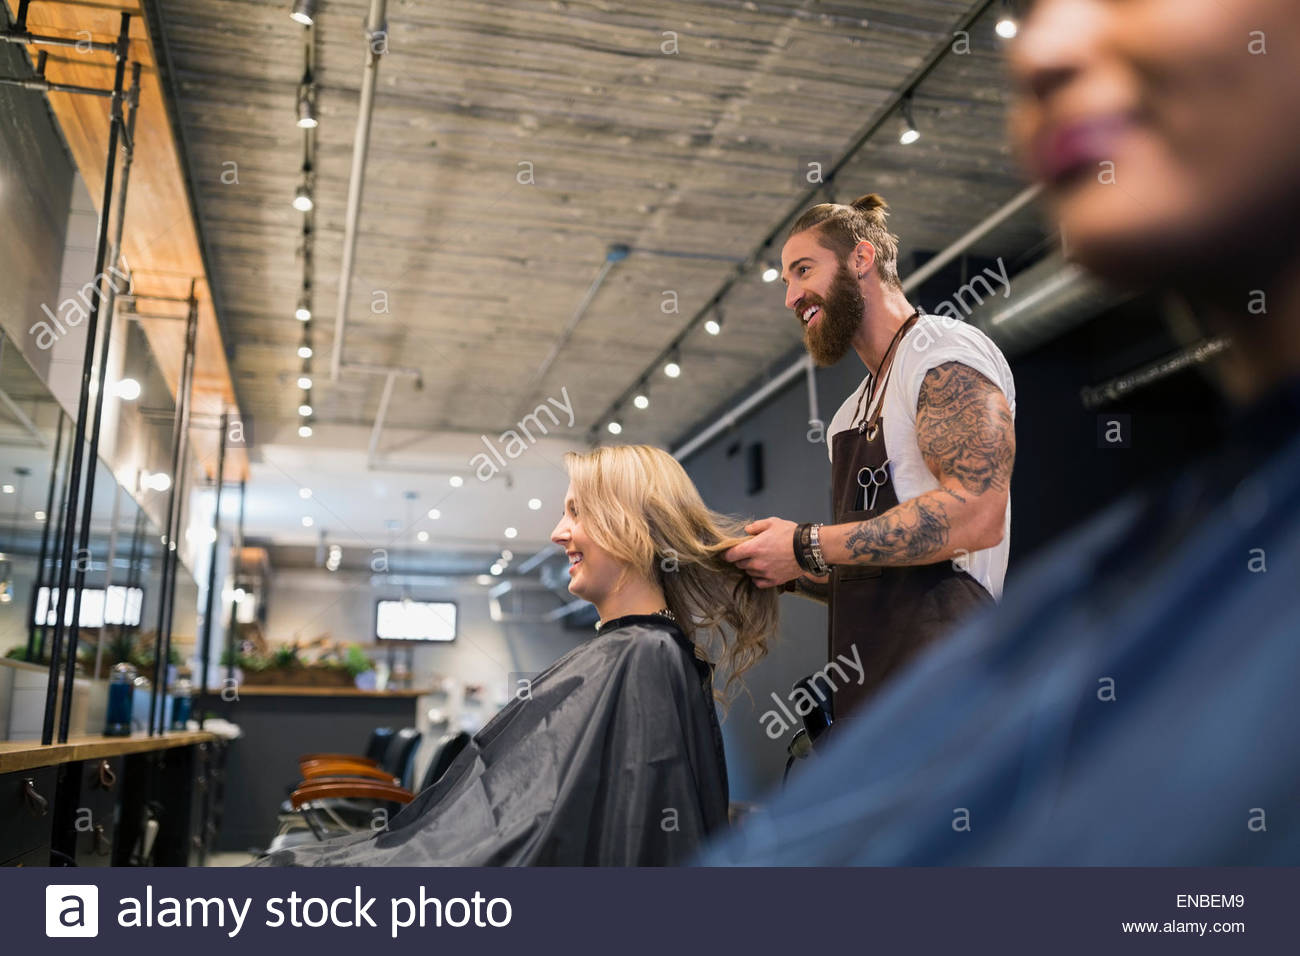 Male hairstylist styling womans hair in hair salon Stock Photo